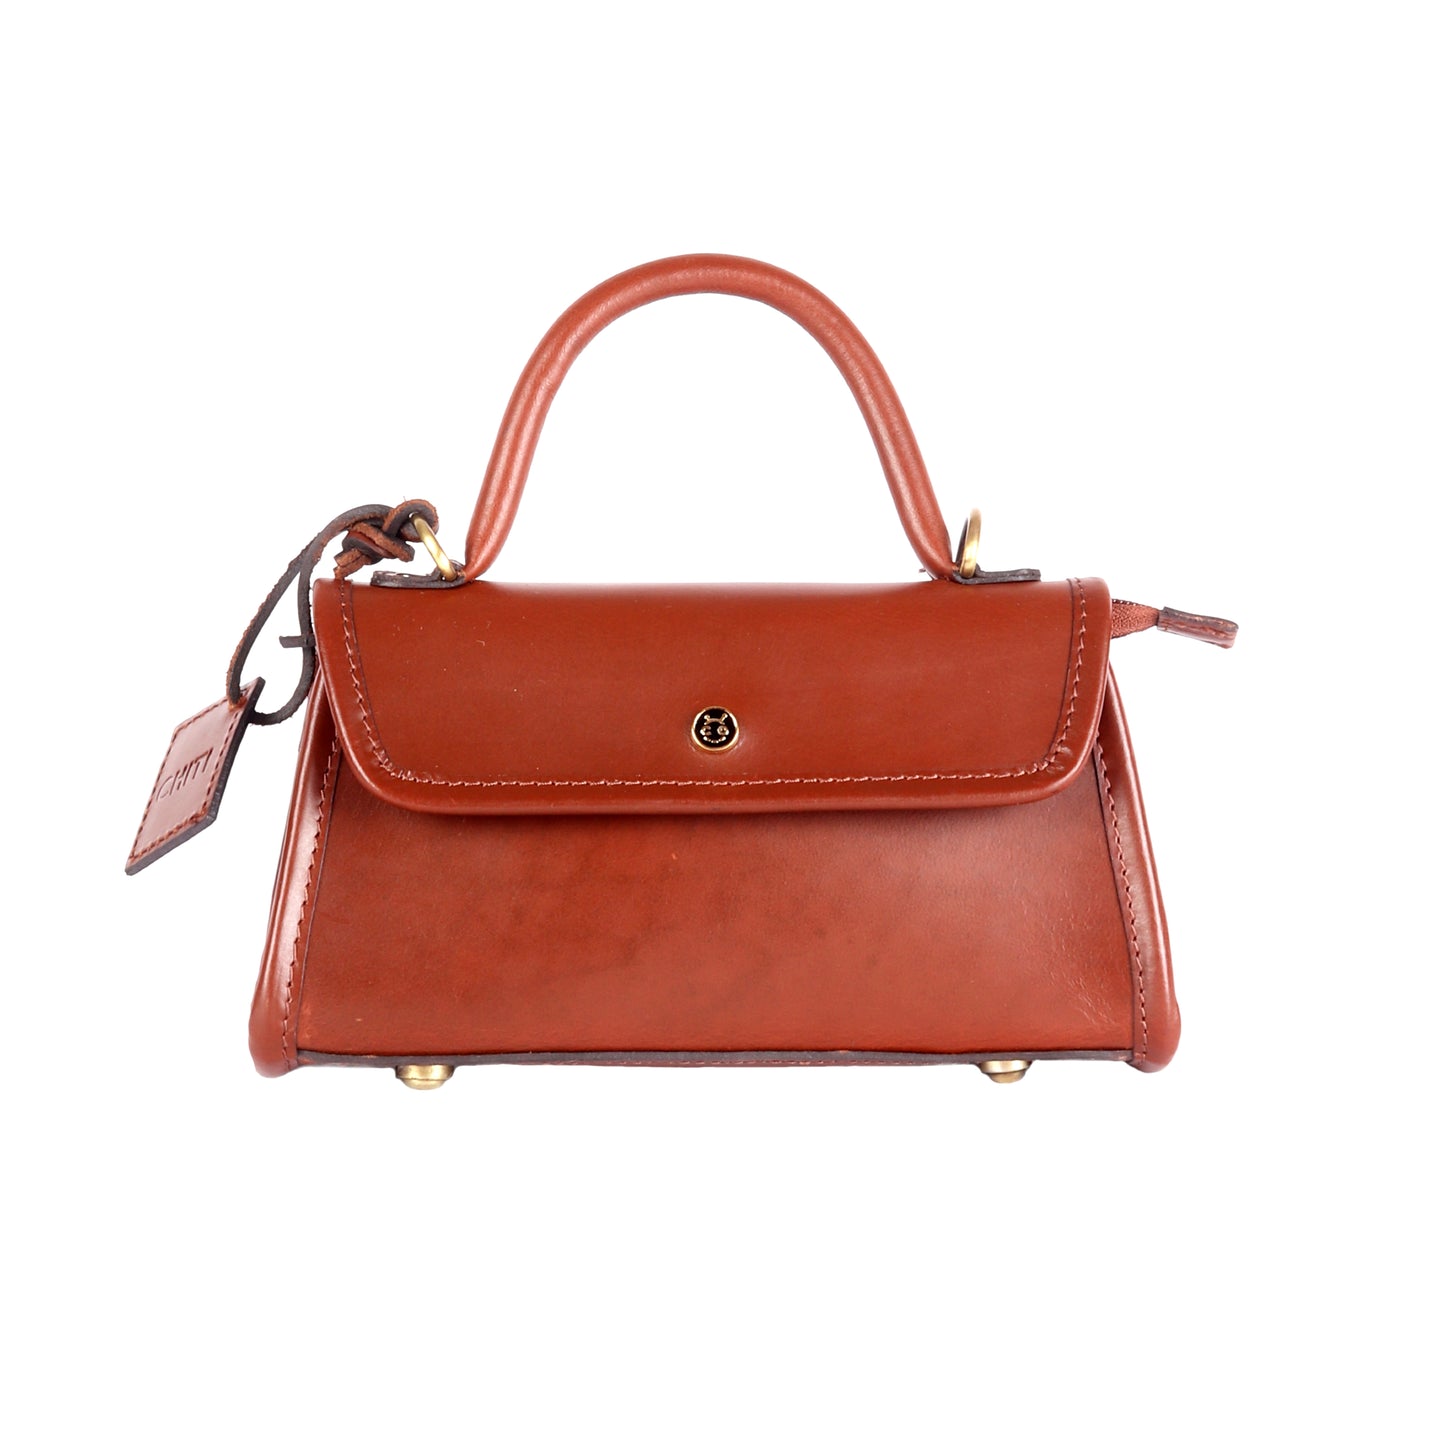 Phobos Small Brown Leather Satchel